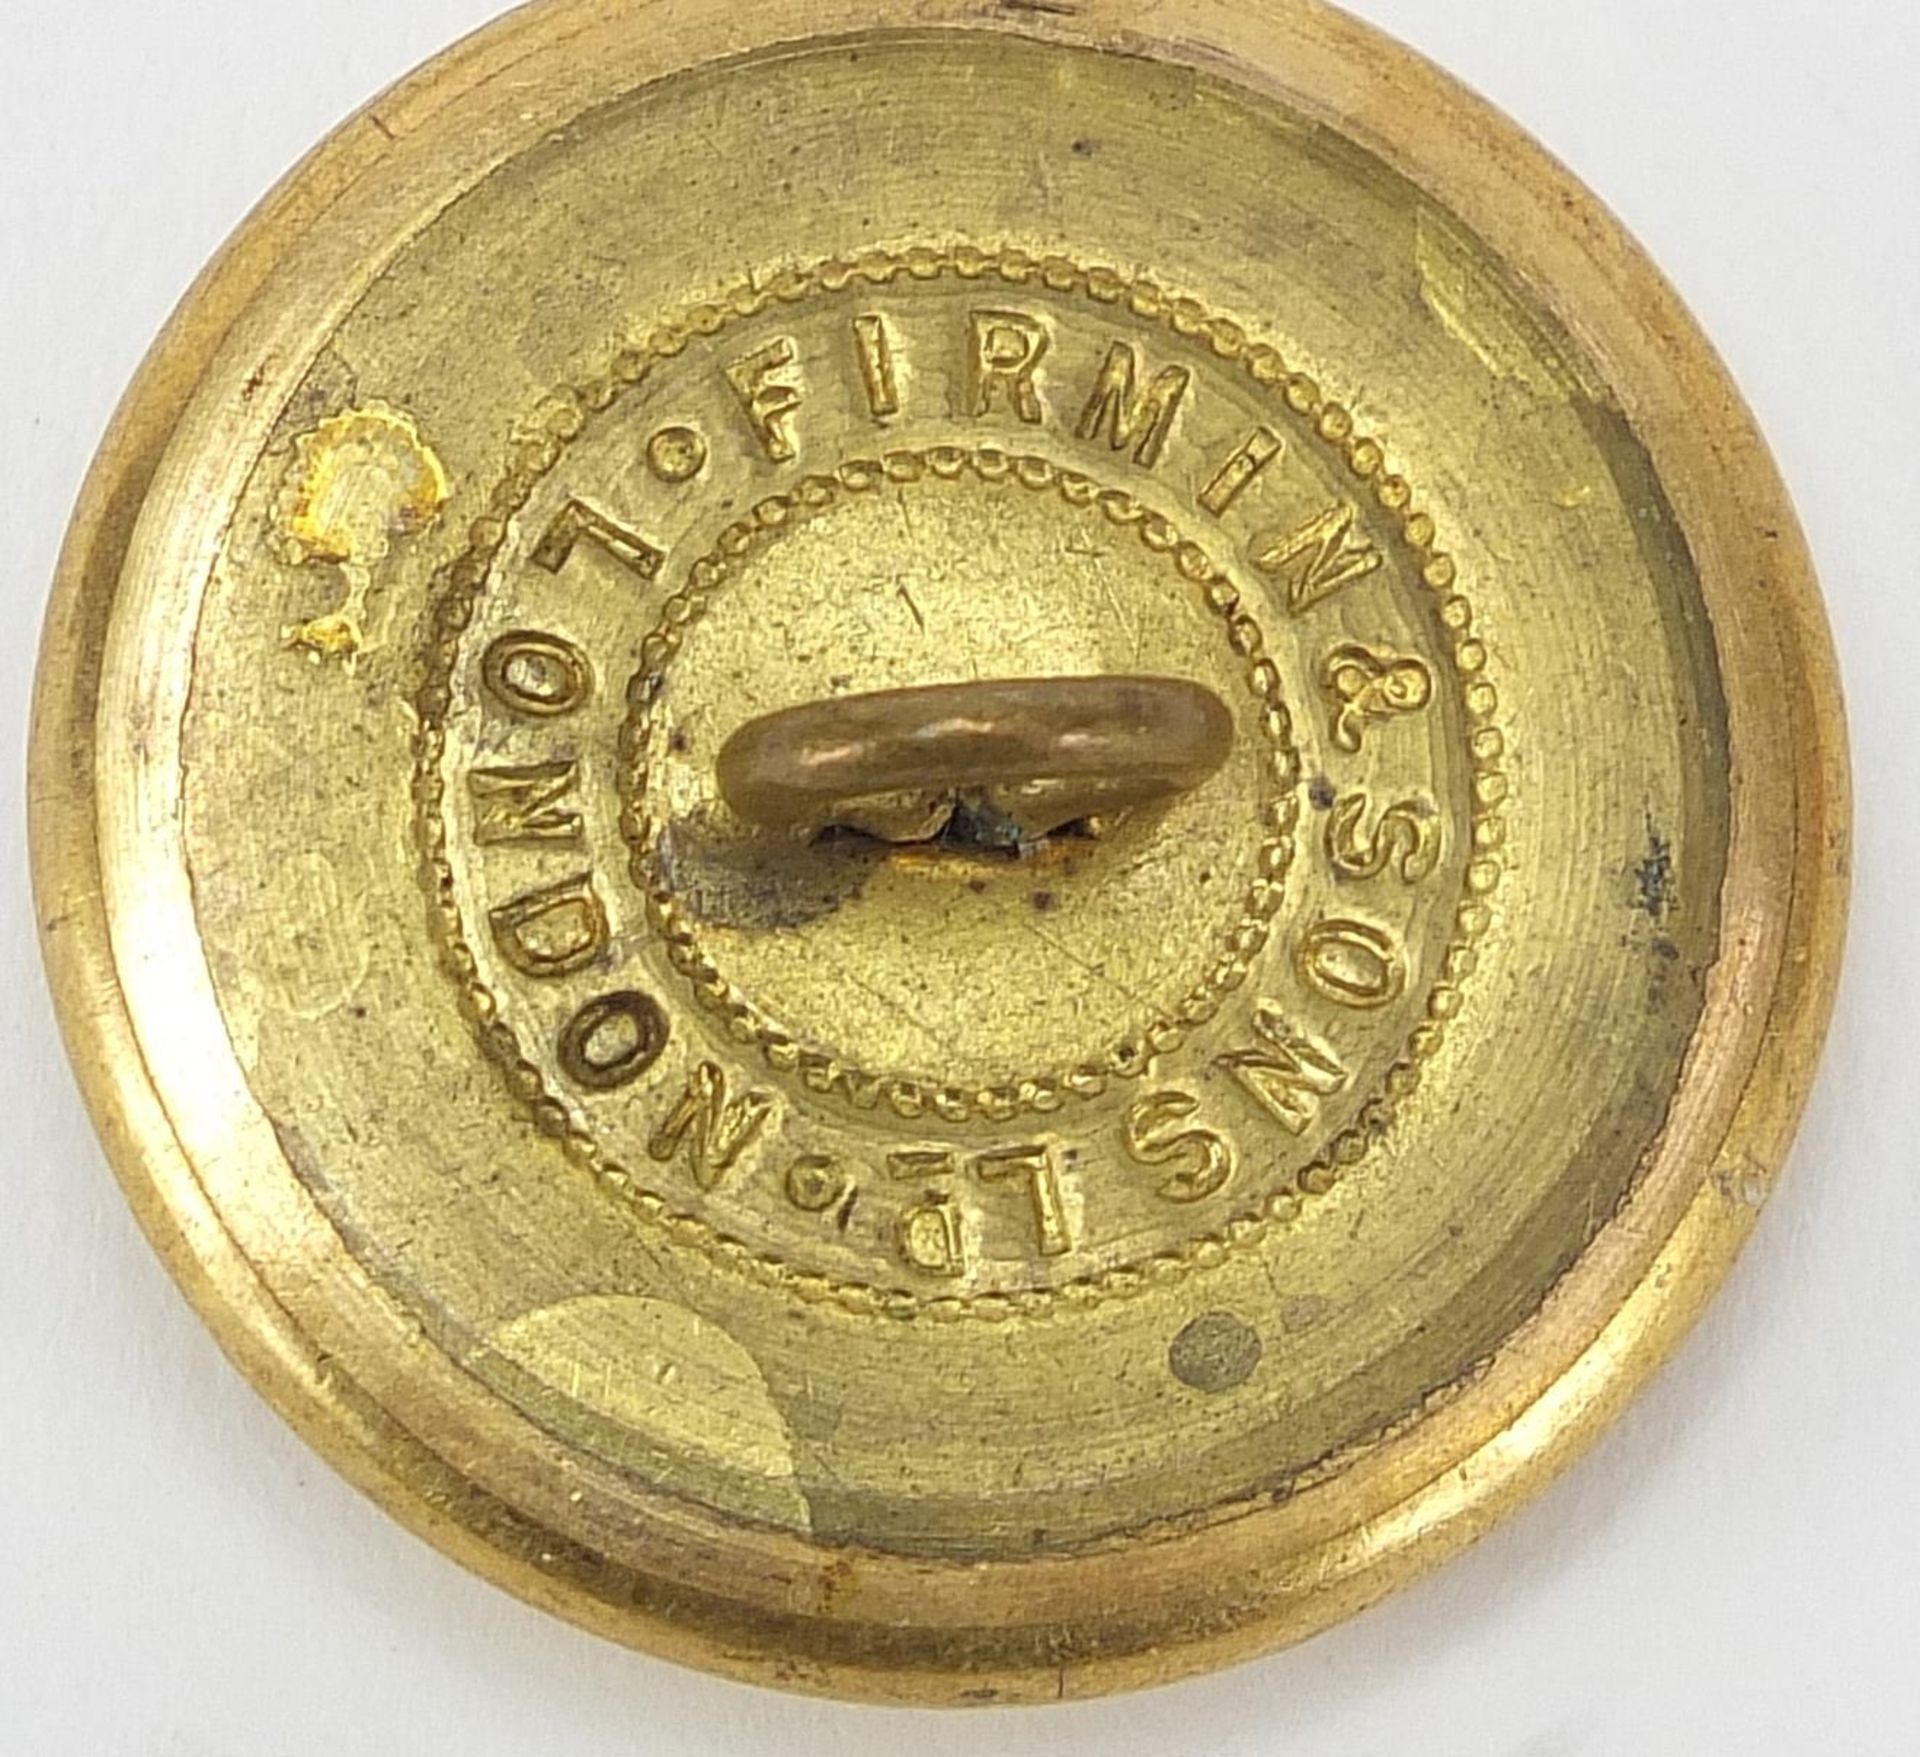 Naval interest gilt metal buttons - Image 5 of 5